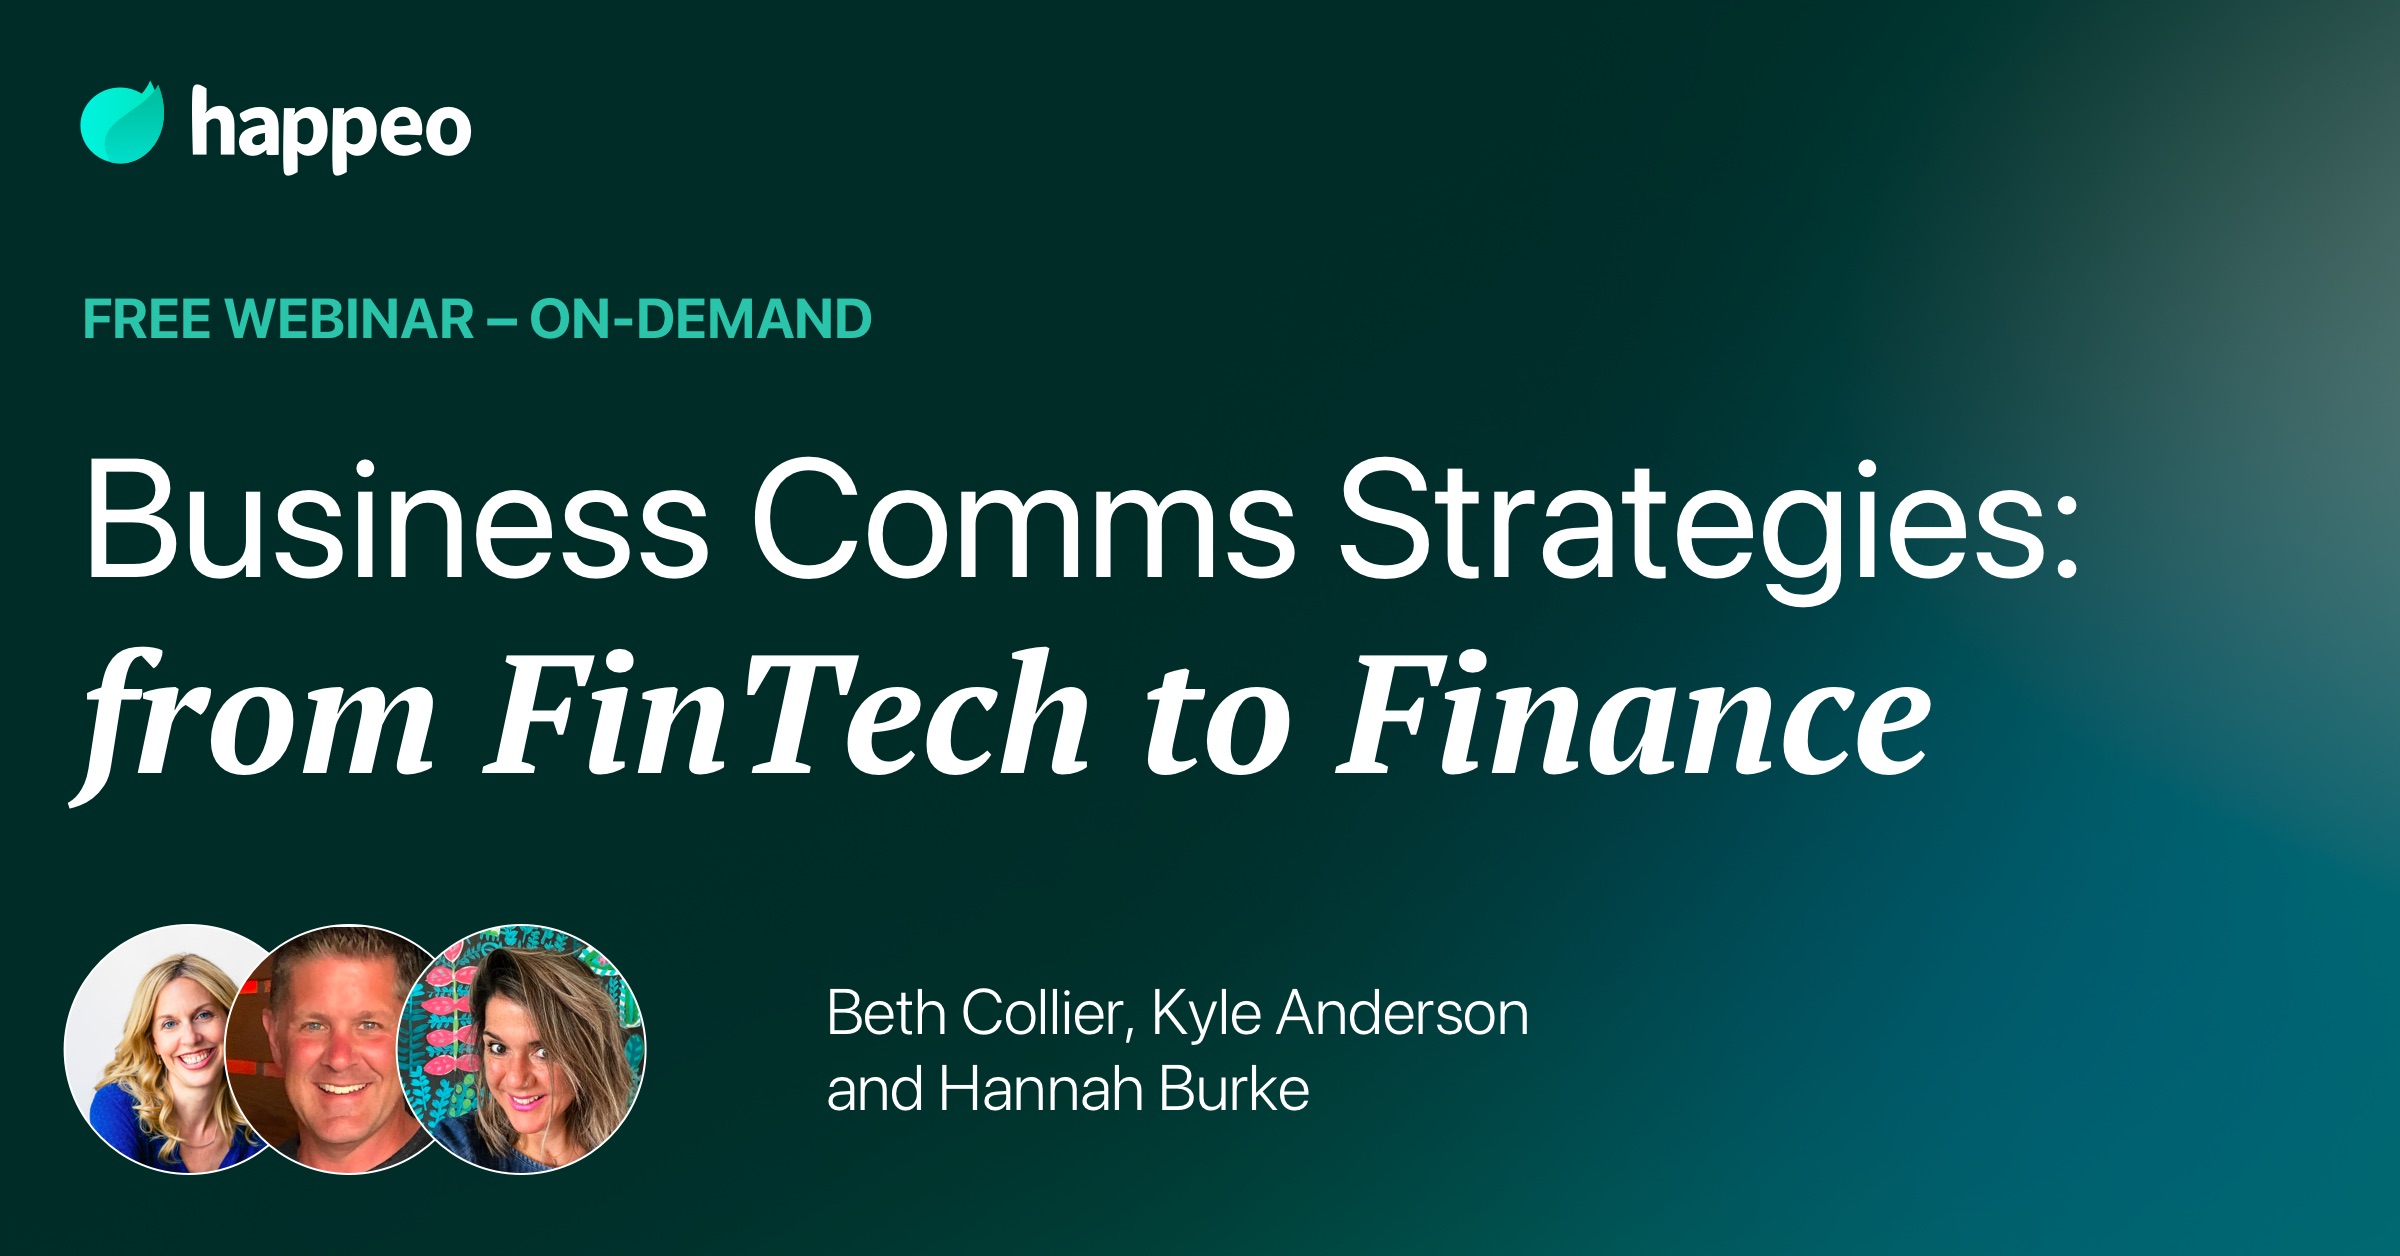 Business Comms strategies: From FinTech to Finance